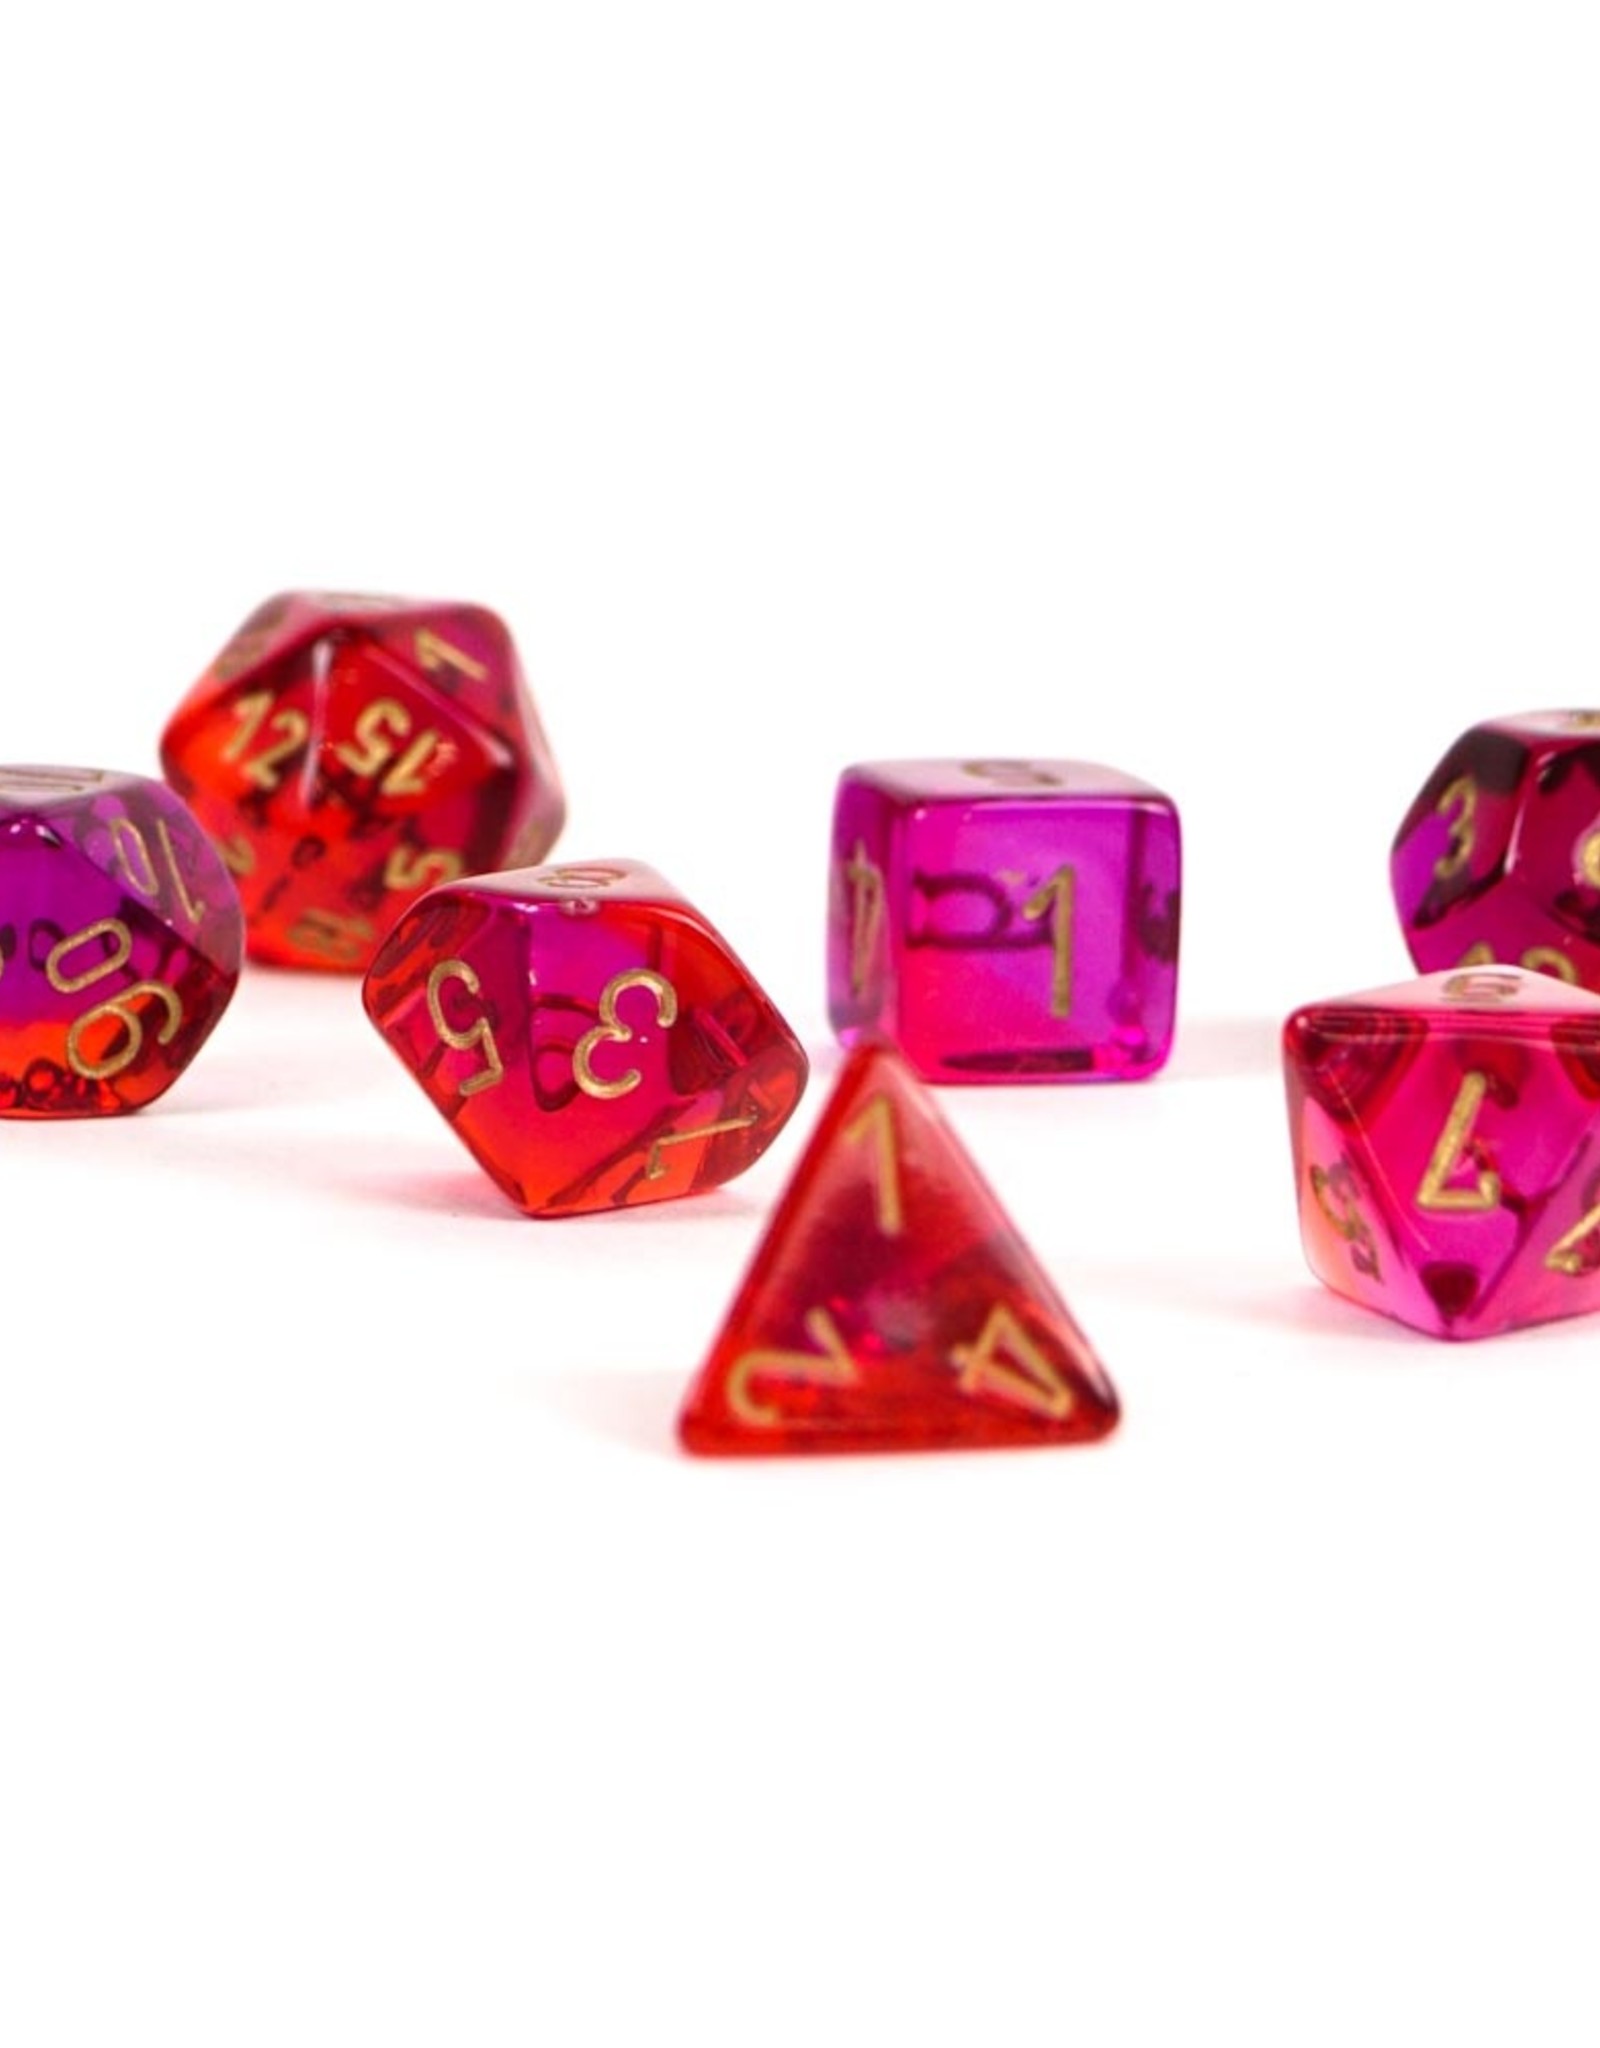 Chessex Dice - 7pc Gemini  Translucent Red-Violet/Gold Polyhedral